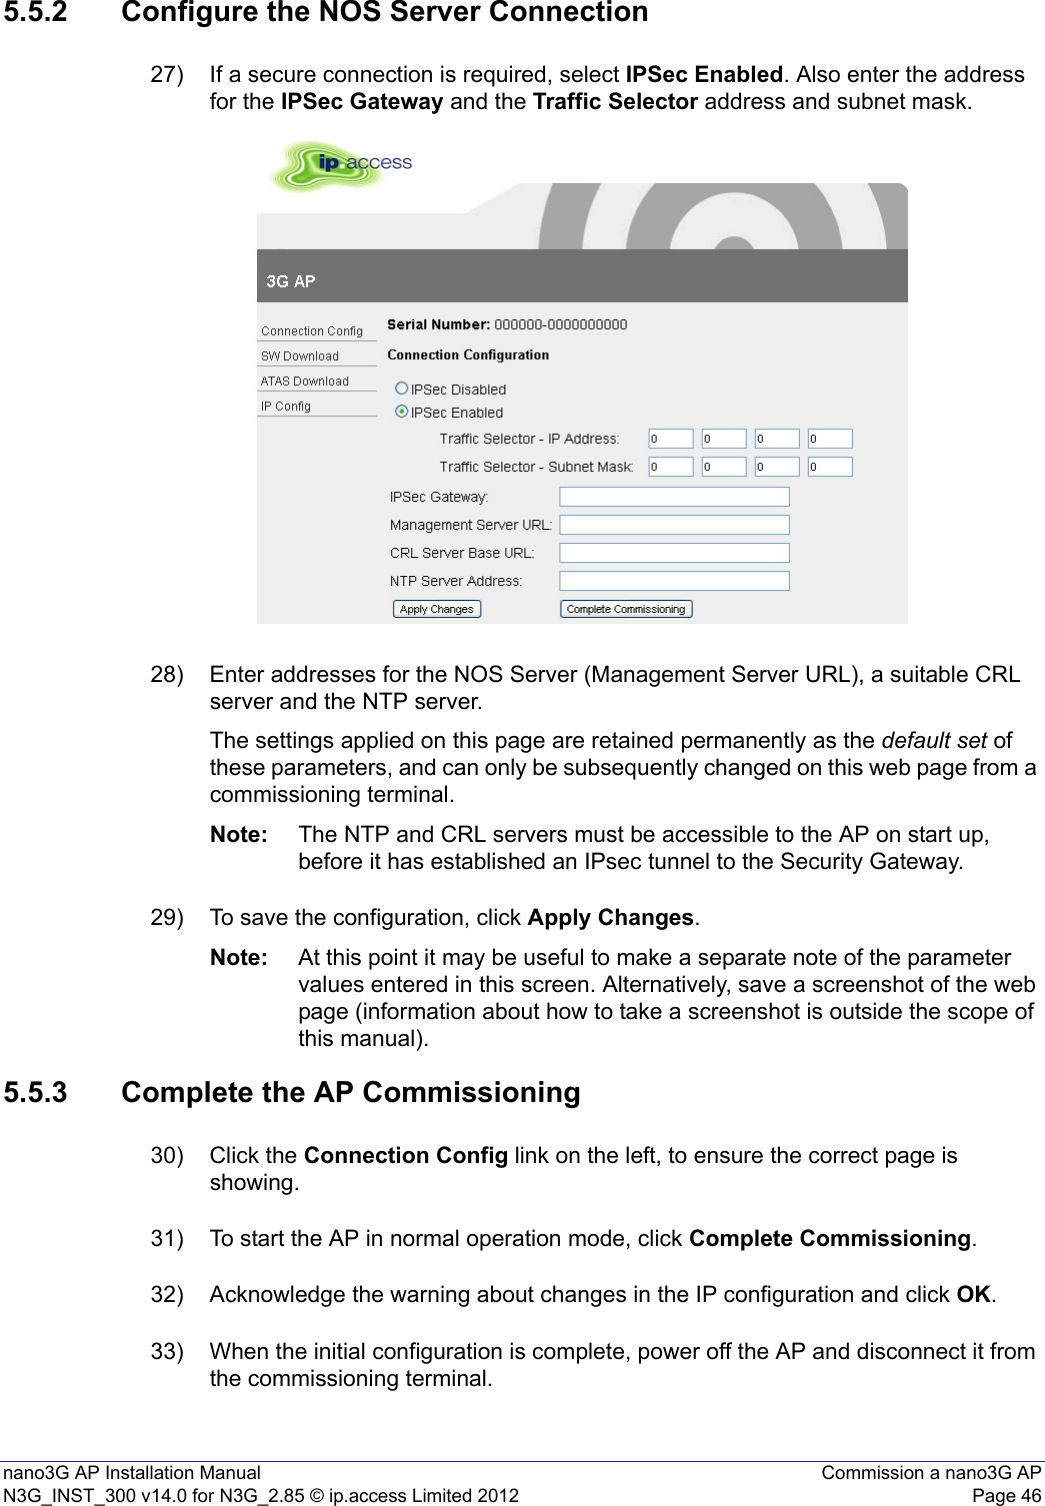 nano3G AP Installation Manual Commission a nano3G APN3G_INST_300 v14.0 for N3G_2.85 © ip.access Limited 2012 Page 465.5.2 Configure the NOS Server Connection27) If a secure connection is required, select IPSec Enabled. Also enter the address for the IPSec Gateway and the Traffic Selector address and subnet mask.28) Enter addresses for the NOS Server (Management Server URL), a suitable CRL server and the NTP server.The settings applied on this page are retained permanently as the default set of these parameters, and can only be subsequently changed on this web page from a commissioning terminal. Note: The NTP and CRL servers must be accessible to the AP on start up, before it has established an IPsec tunnel to the Security Gateway.29) To save the configuration, click Apply Changes.Note: At this point it may be useful to make a separate note of the parameter values entered in this screen. Alternatively, save a screenshot of the web page (information about how to take a screenshot is outside the scope of this manual).5.5.3 Complete the AP Commissioning30) Click the Connection Config link on the left, to ensure the correct page is showing.31) To start the AP in normal operation mode, click Complete Commissioning.32) Acknowledge the warning about changes in the IP configuration and click OK.33) When the initial configuration is complete, power off the AP and disconnect it from the commissioning terminal. 